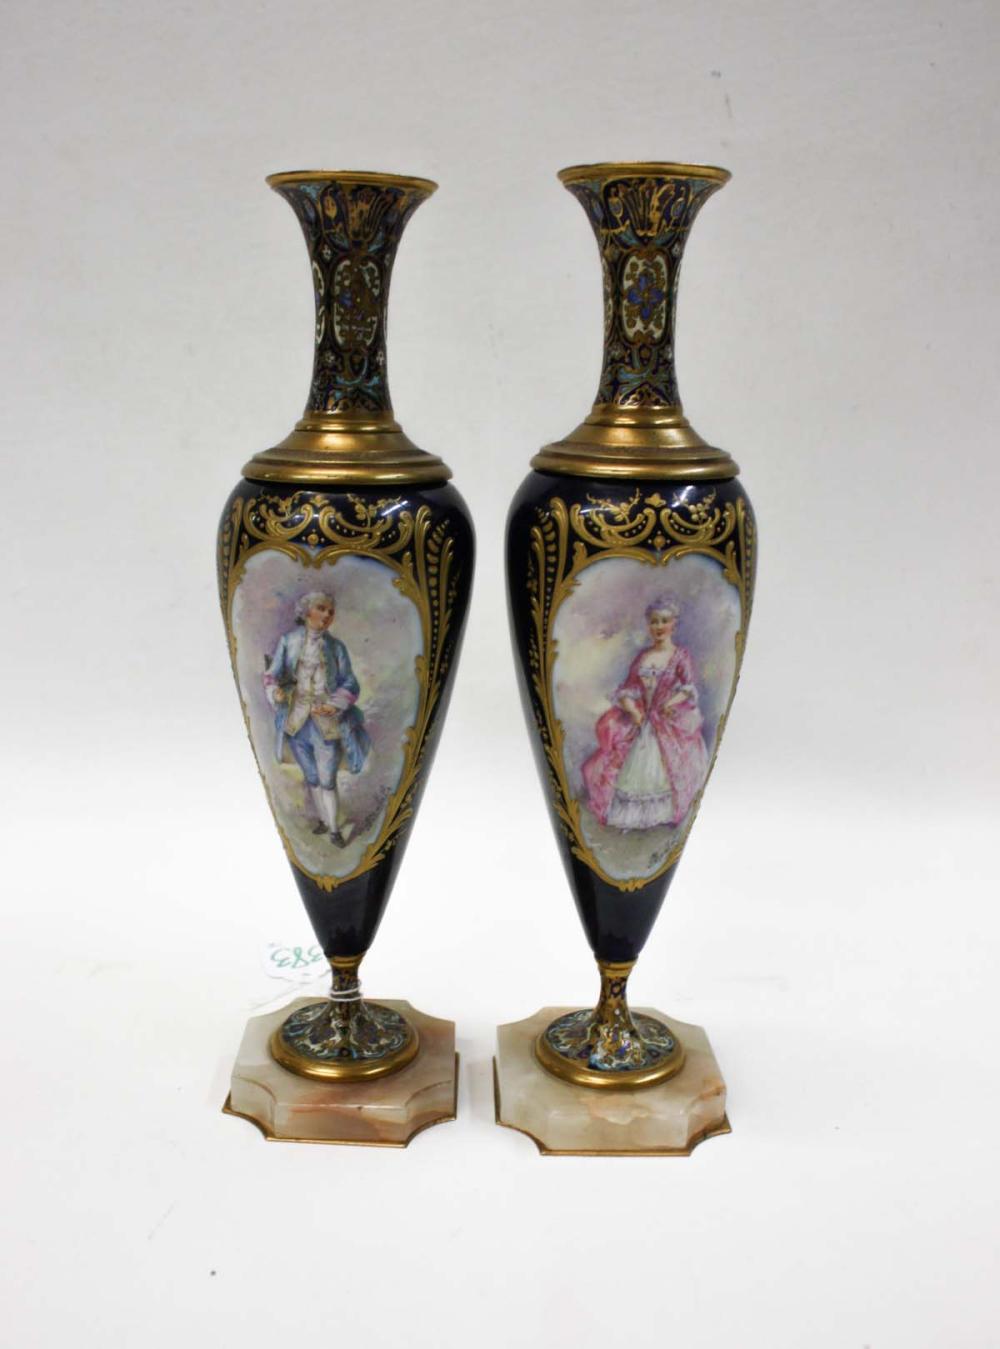 PAIR OF SEVRES STYLE PORCELAIN 33f48f